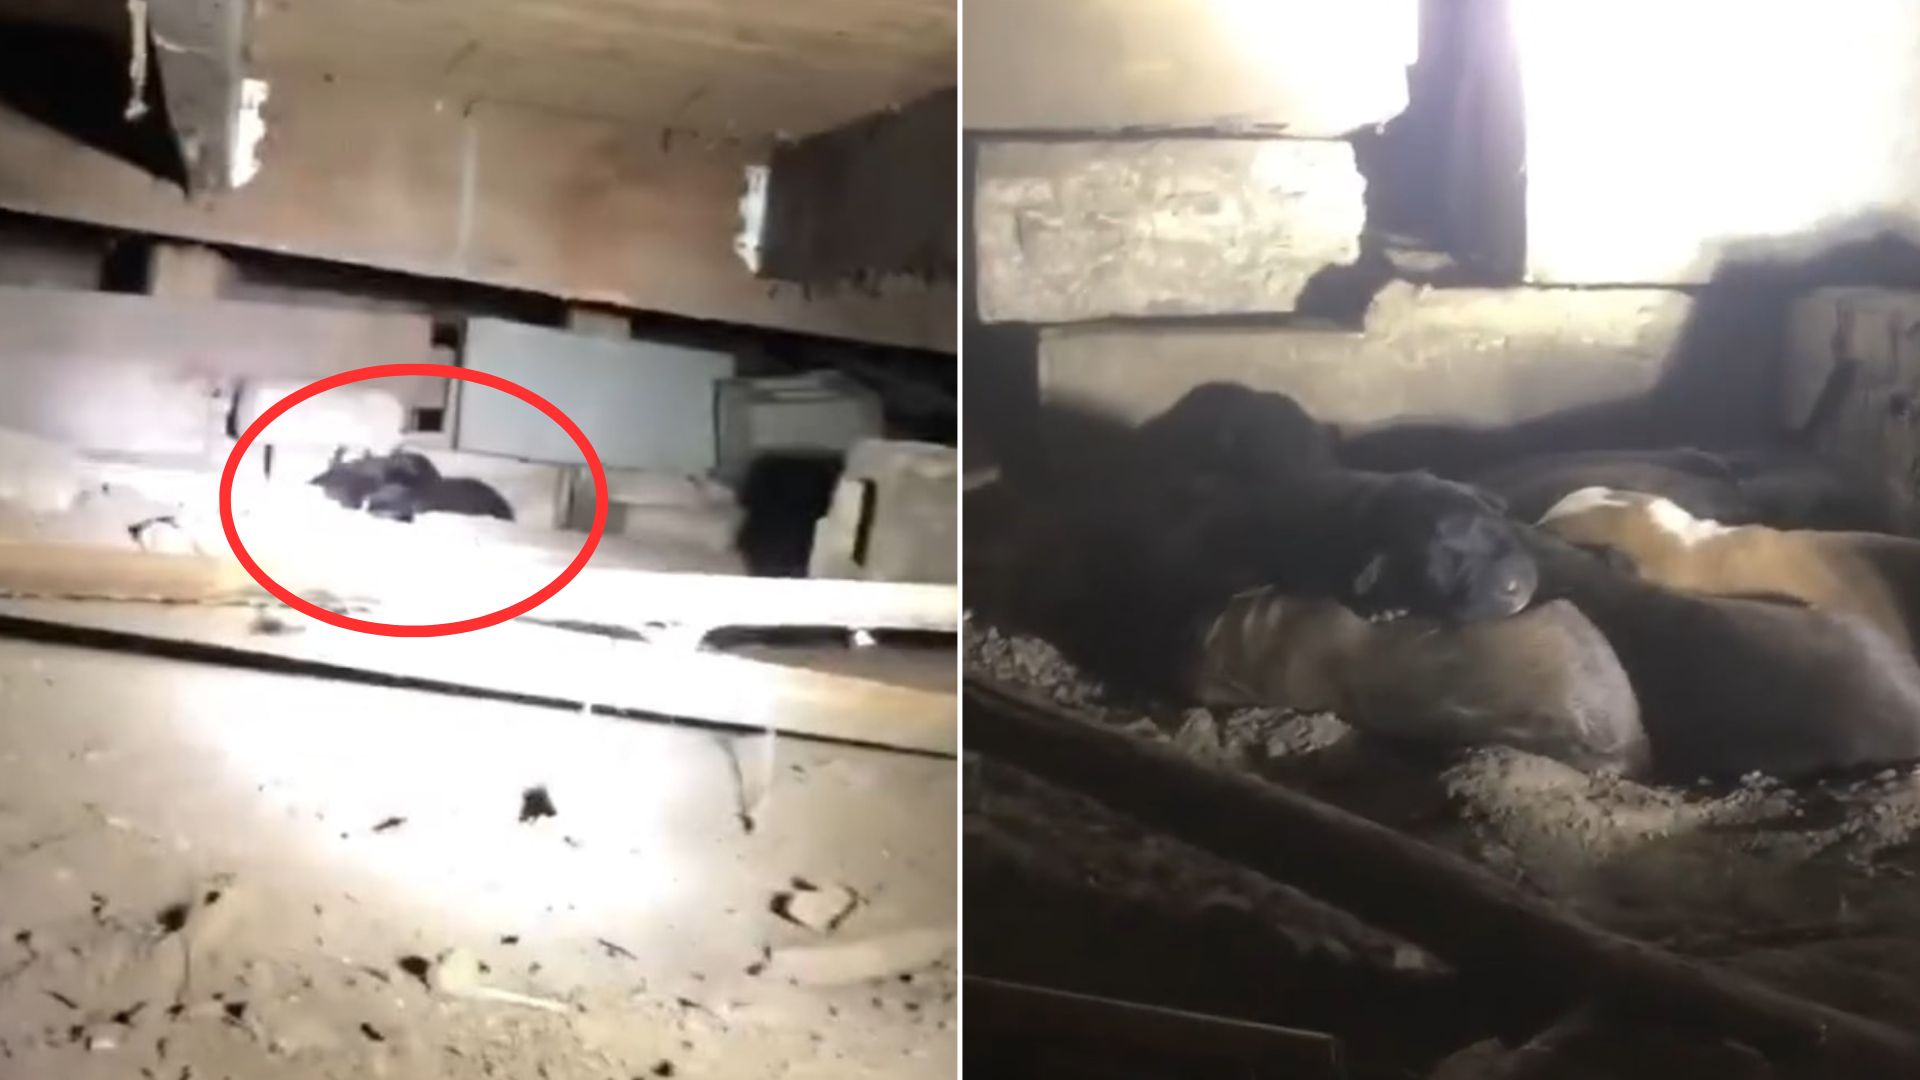 Rescuers Rush To Save An Animal In Need, Then Discover A Shocking Secret